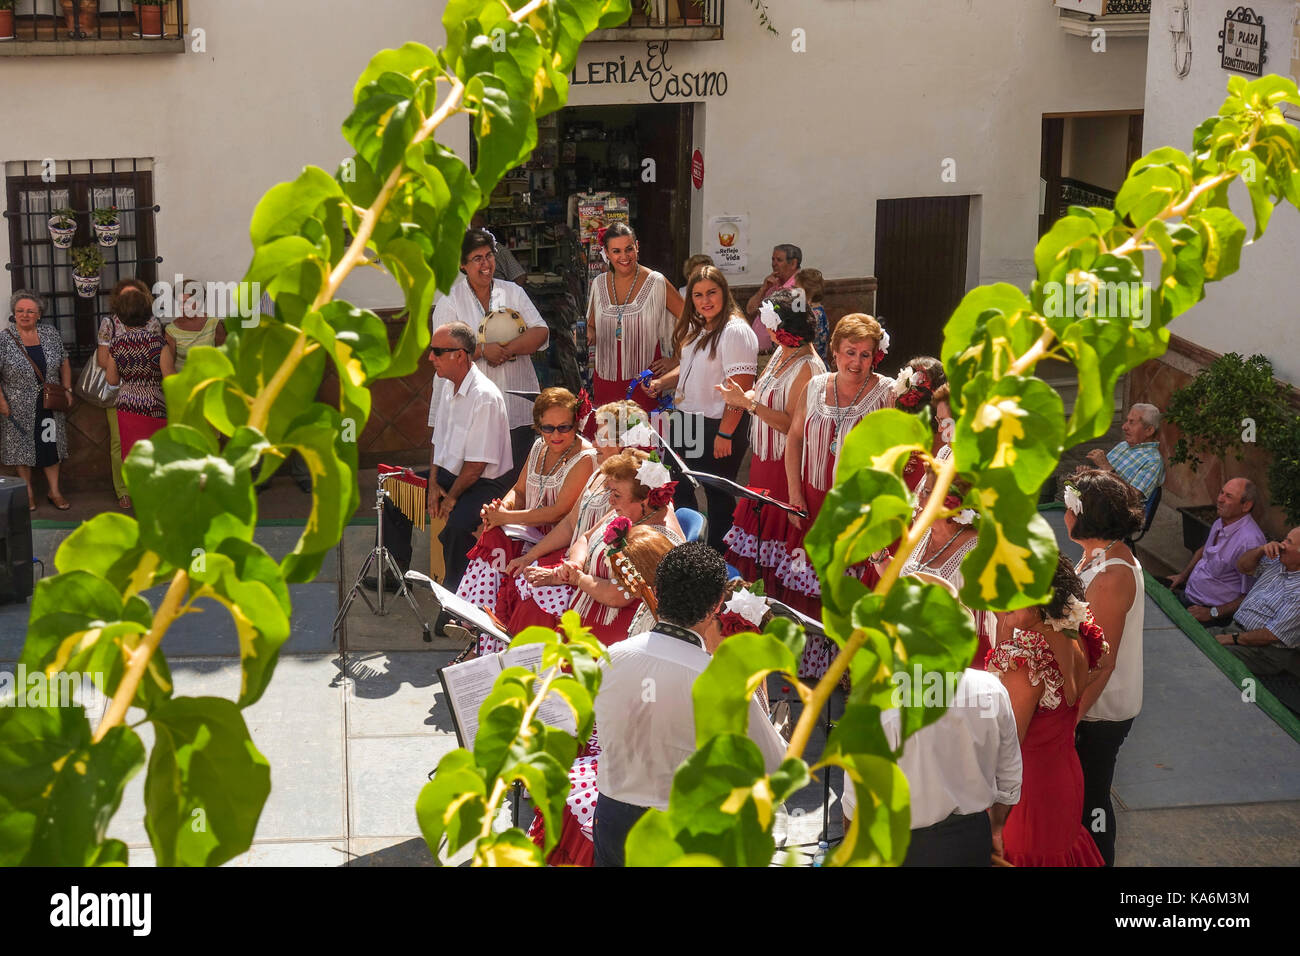 Festivities in the white village of Almogia, Almond festival, markets, market, Andalusia, Spain. Stock Photo